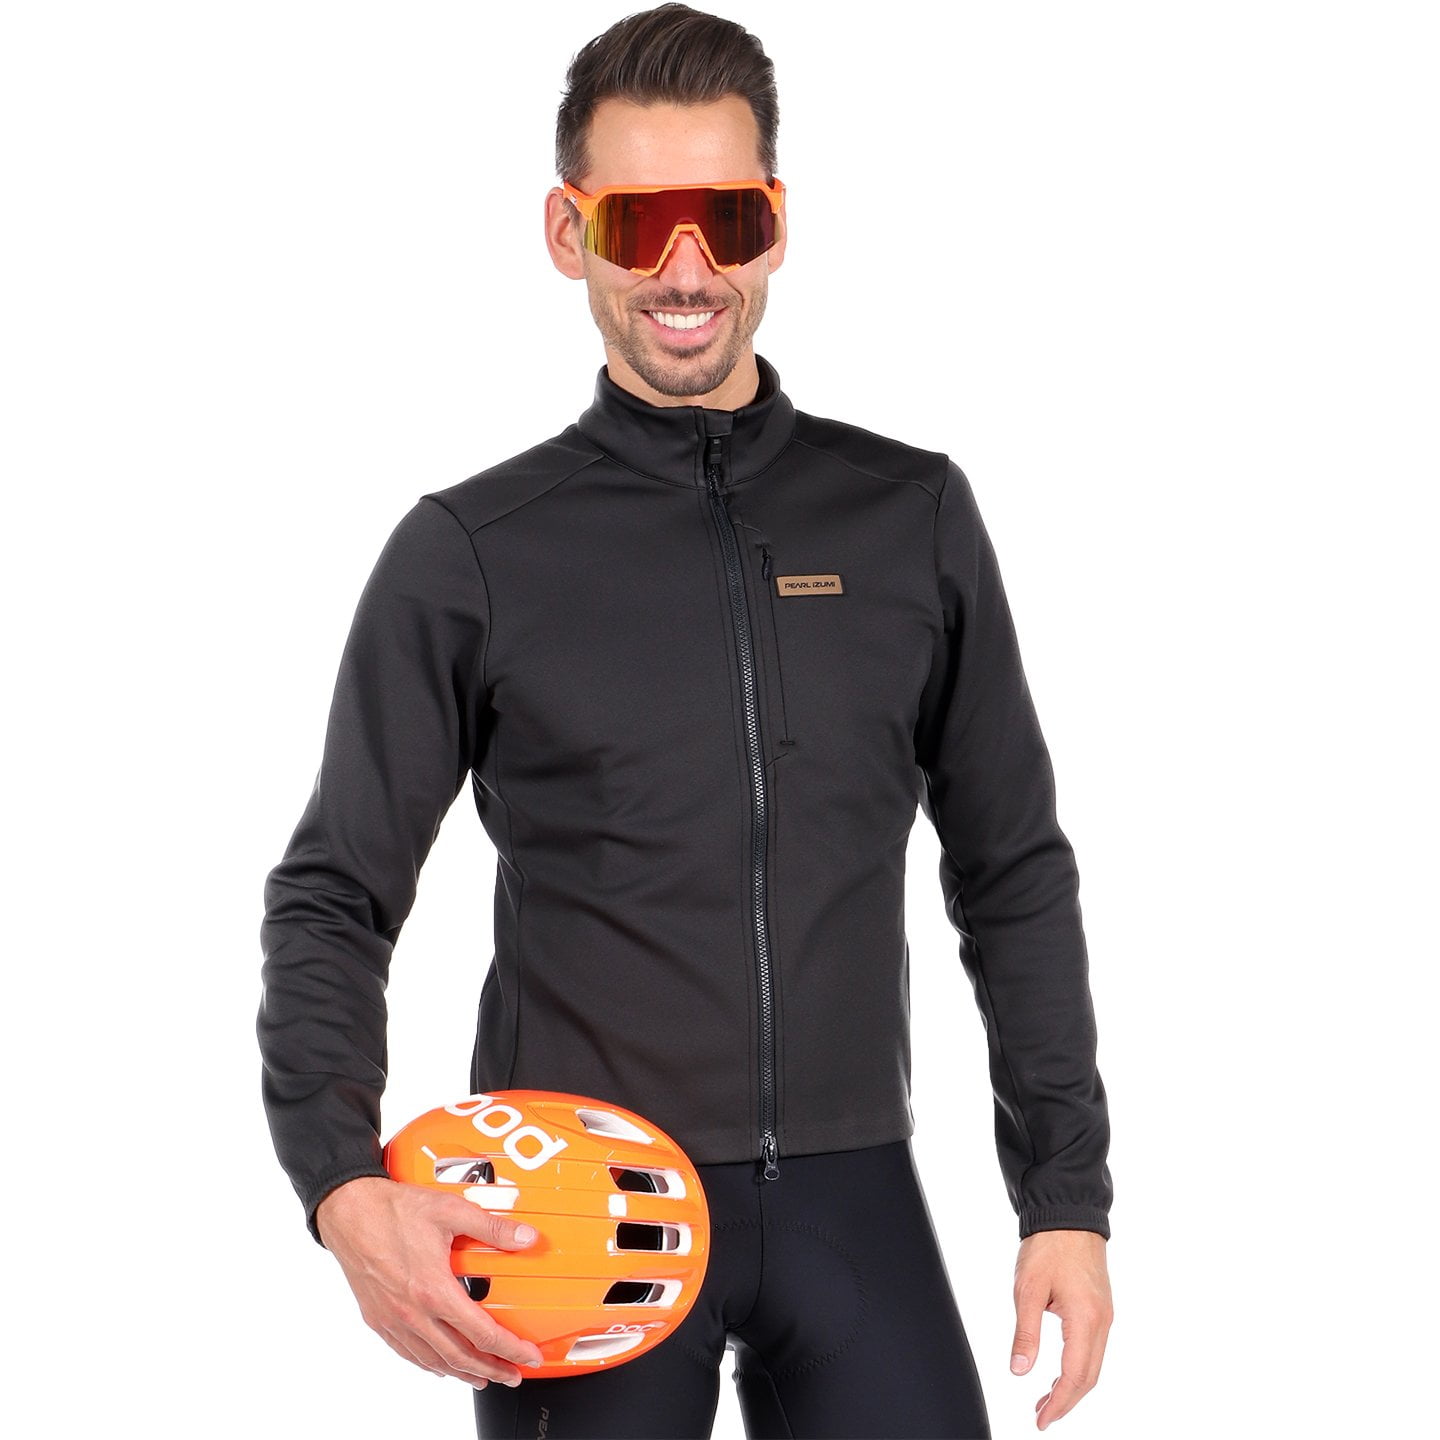 PEARL IZUMI AmFIB Lite Winter Jacket Thermal Jacket, for men, size M, Cycle jacket, Cycling clothing